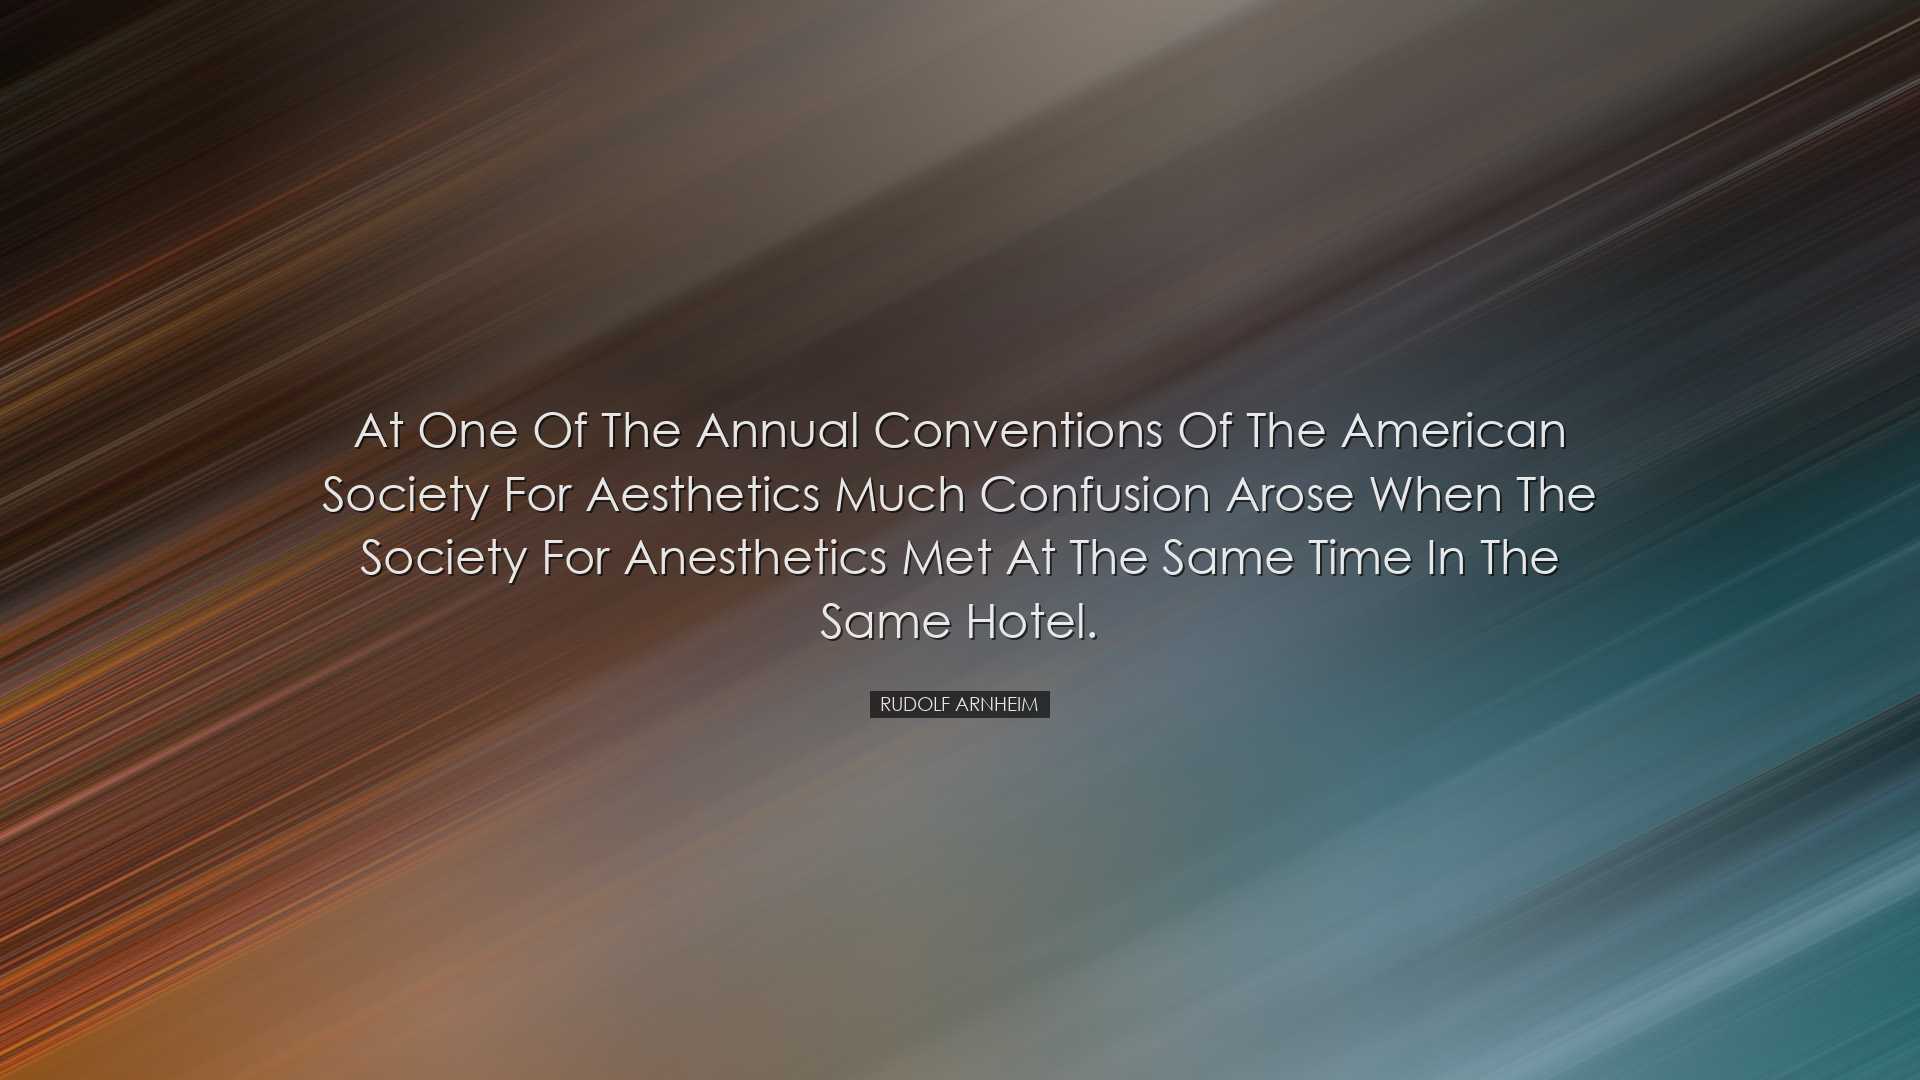 At one of the annual conventions of the American Society for Aesth